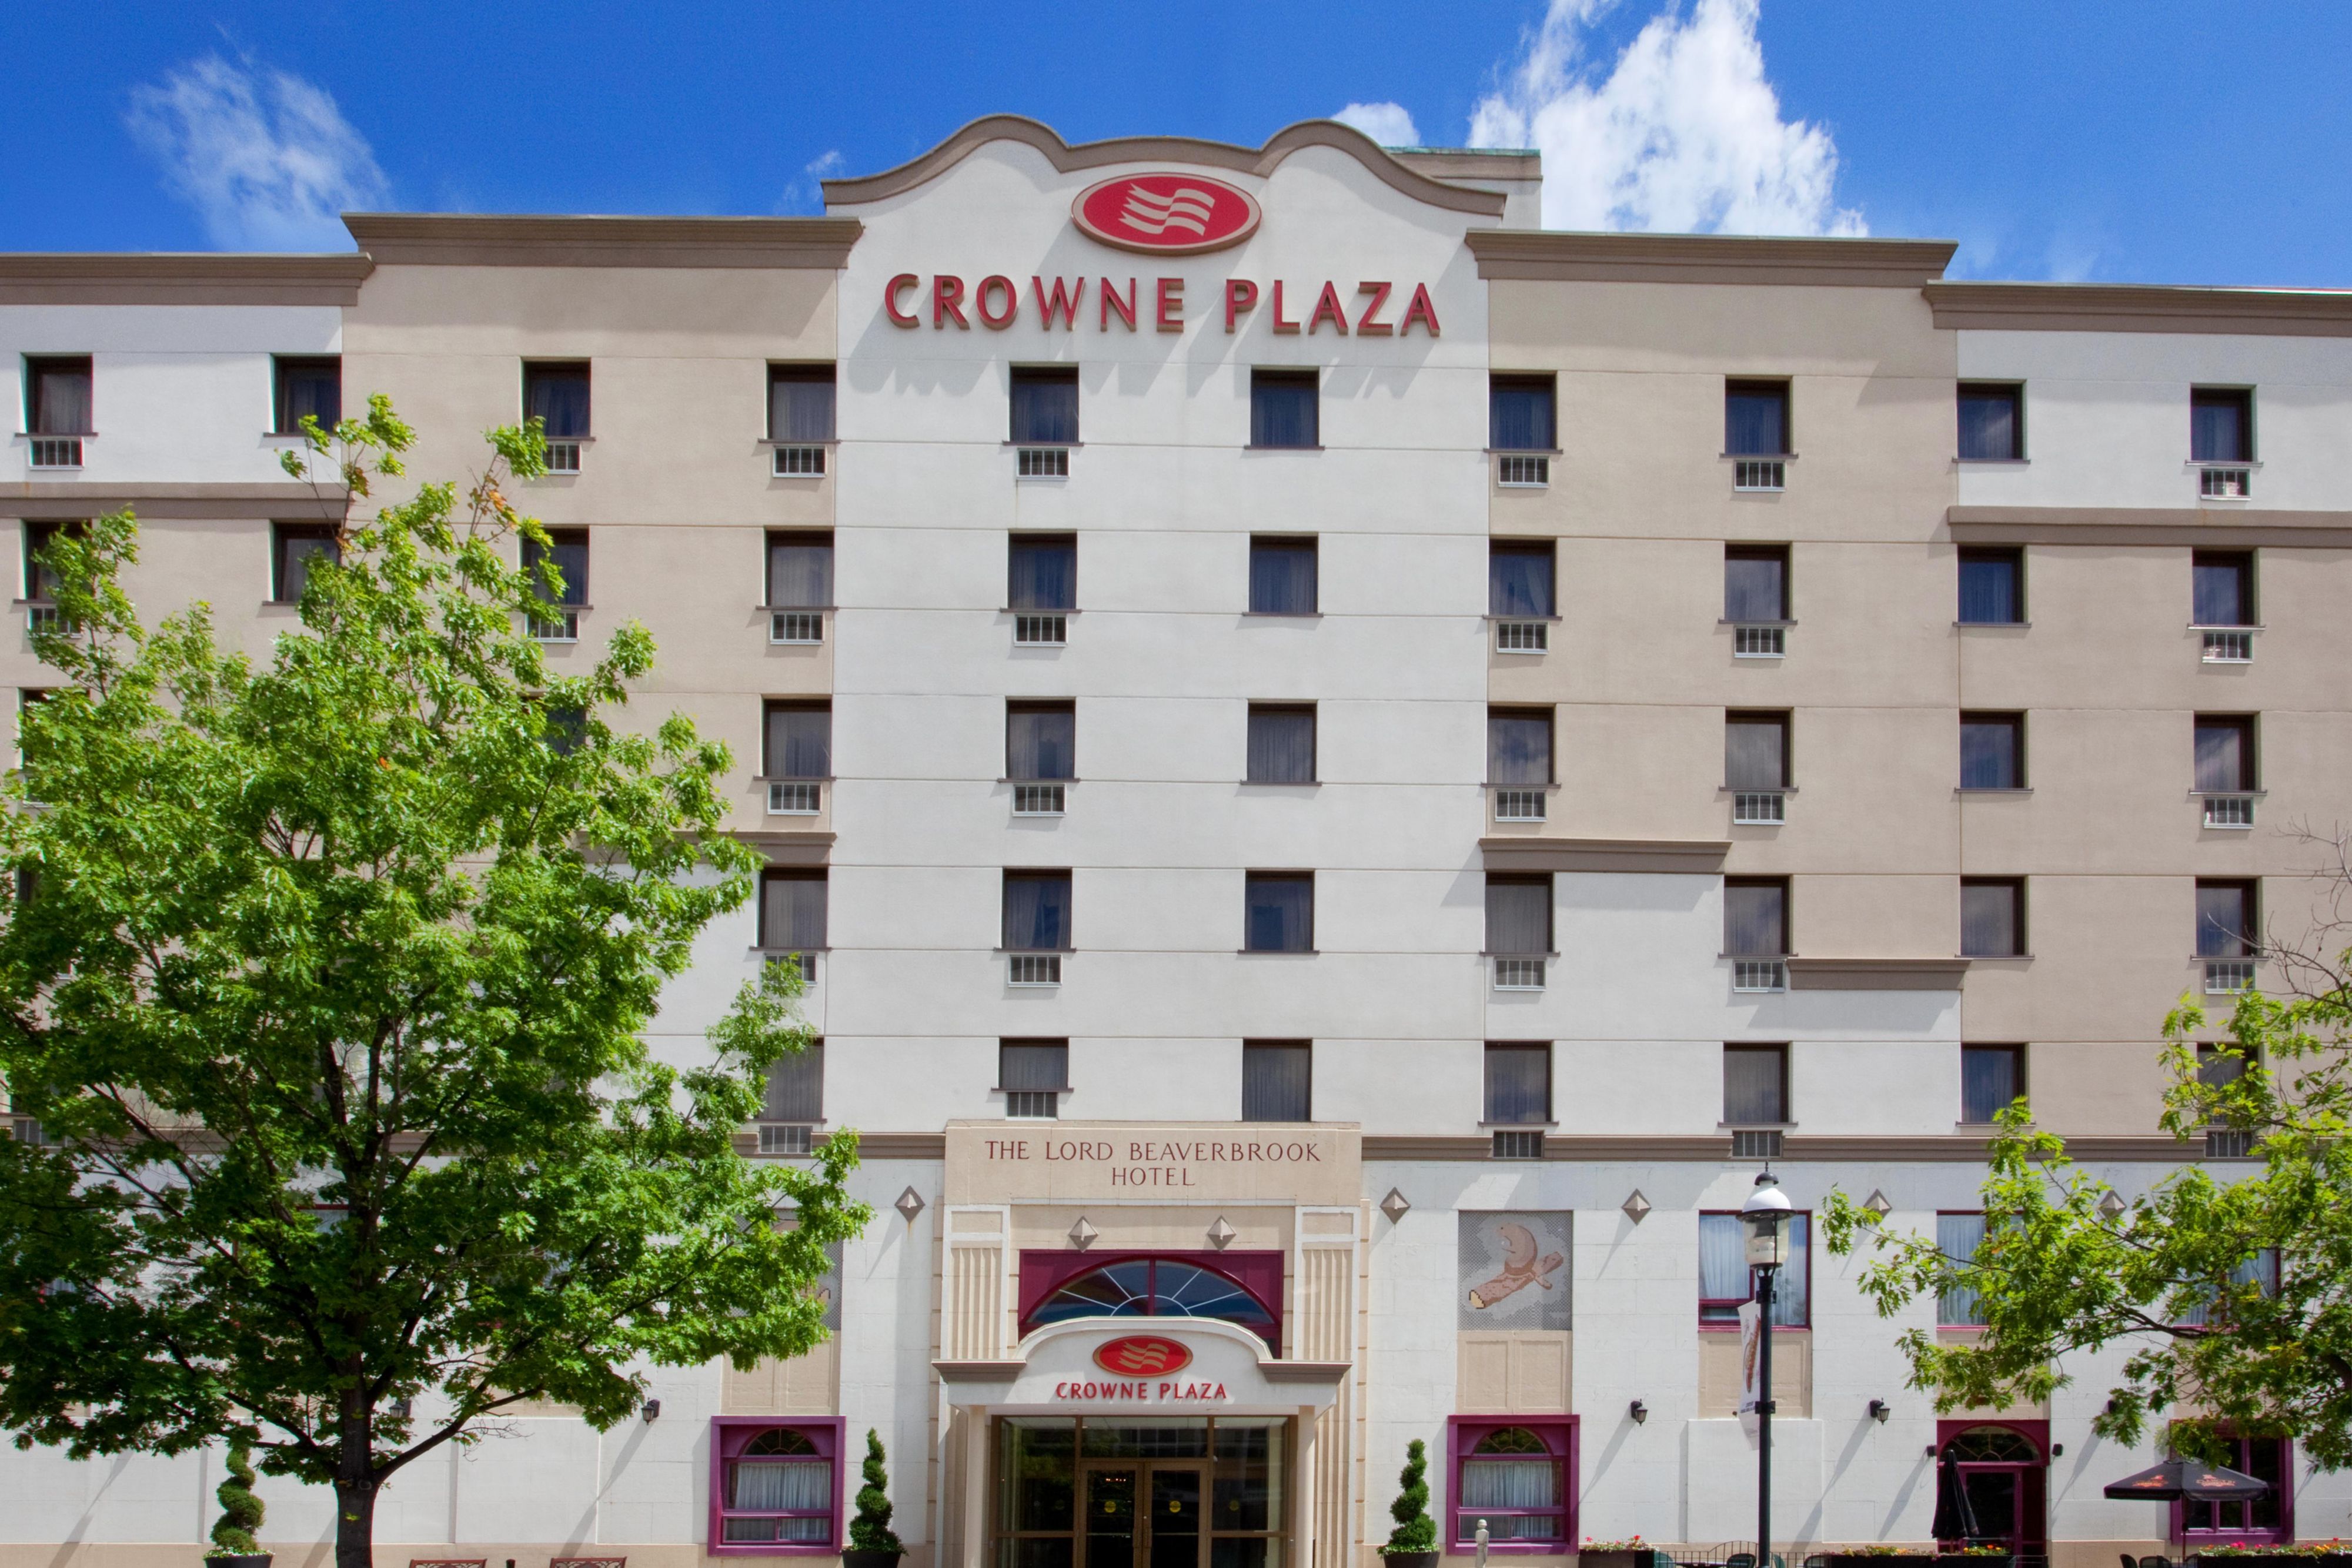 Stay in the 4-star Crowne Plaza Fredericton Lord Beaverbook Hotel